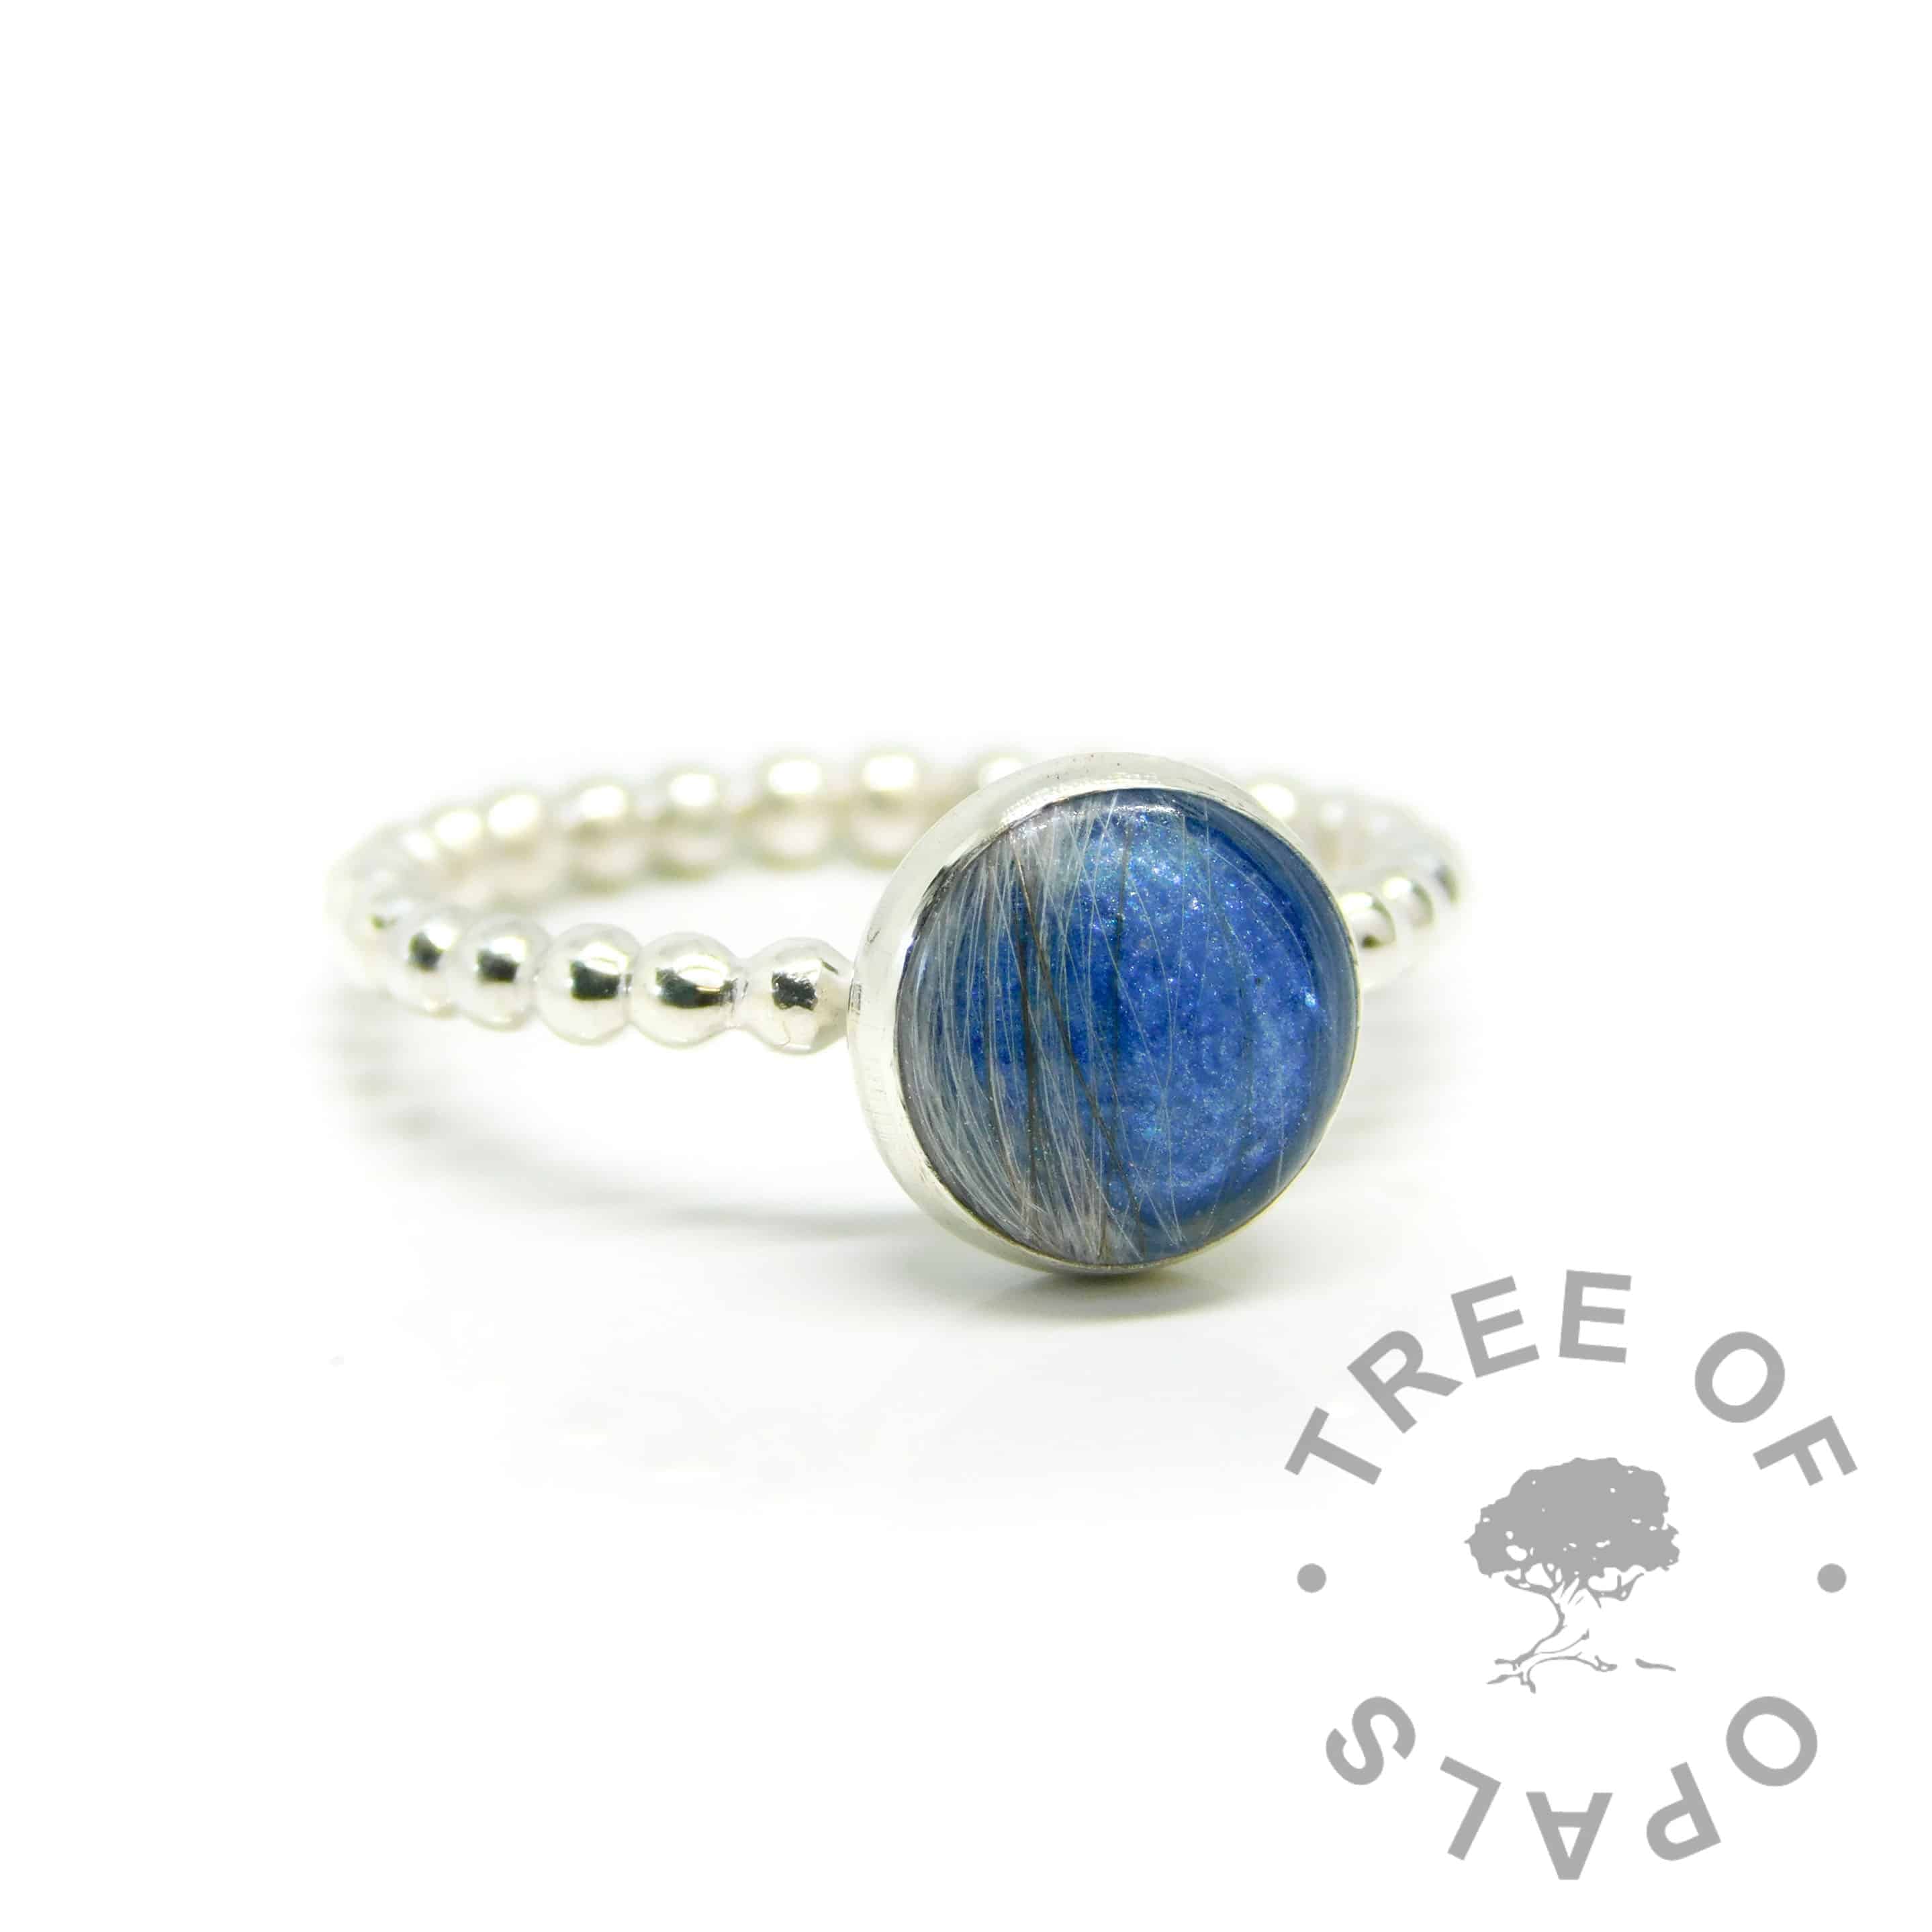 hair ring blue bubble, Aegean blue resin sparkle mix and bubble wire band. 8mm round setting mystery piece possibility (this ring was filmed as a tutorial)